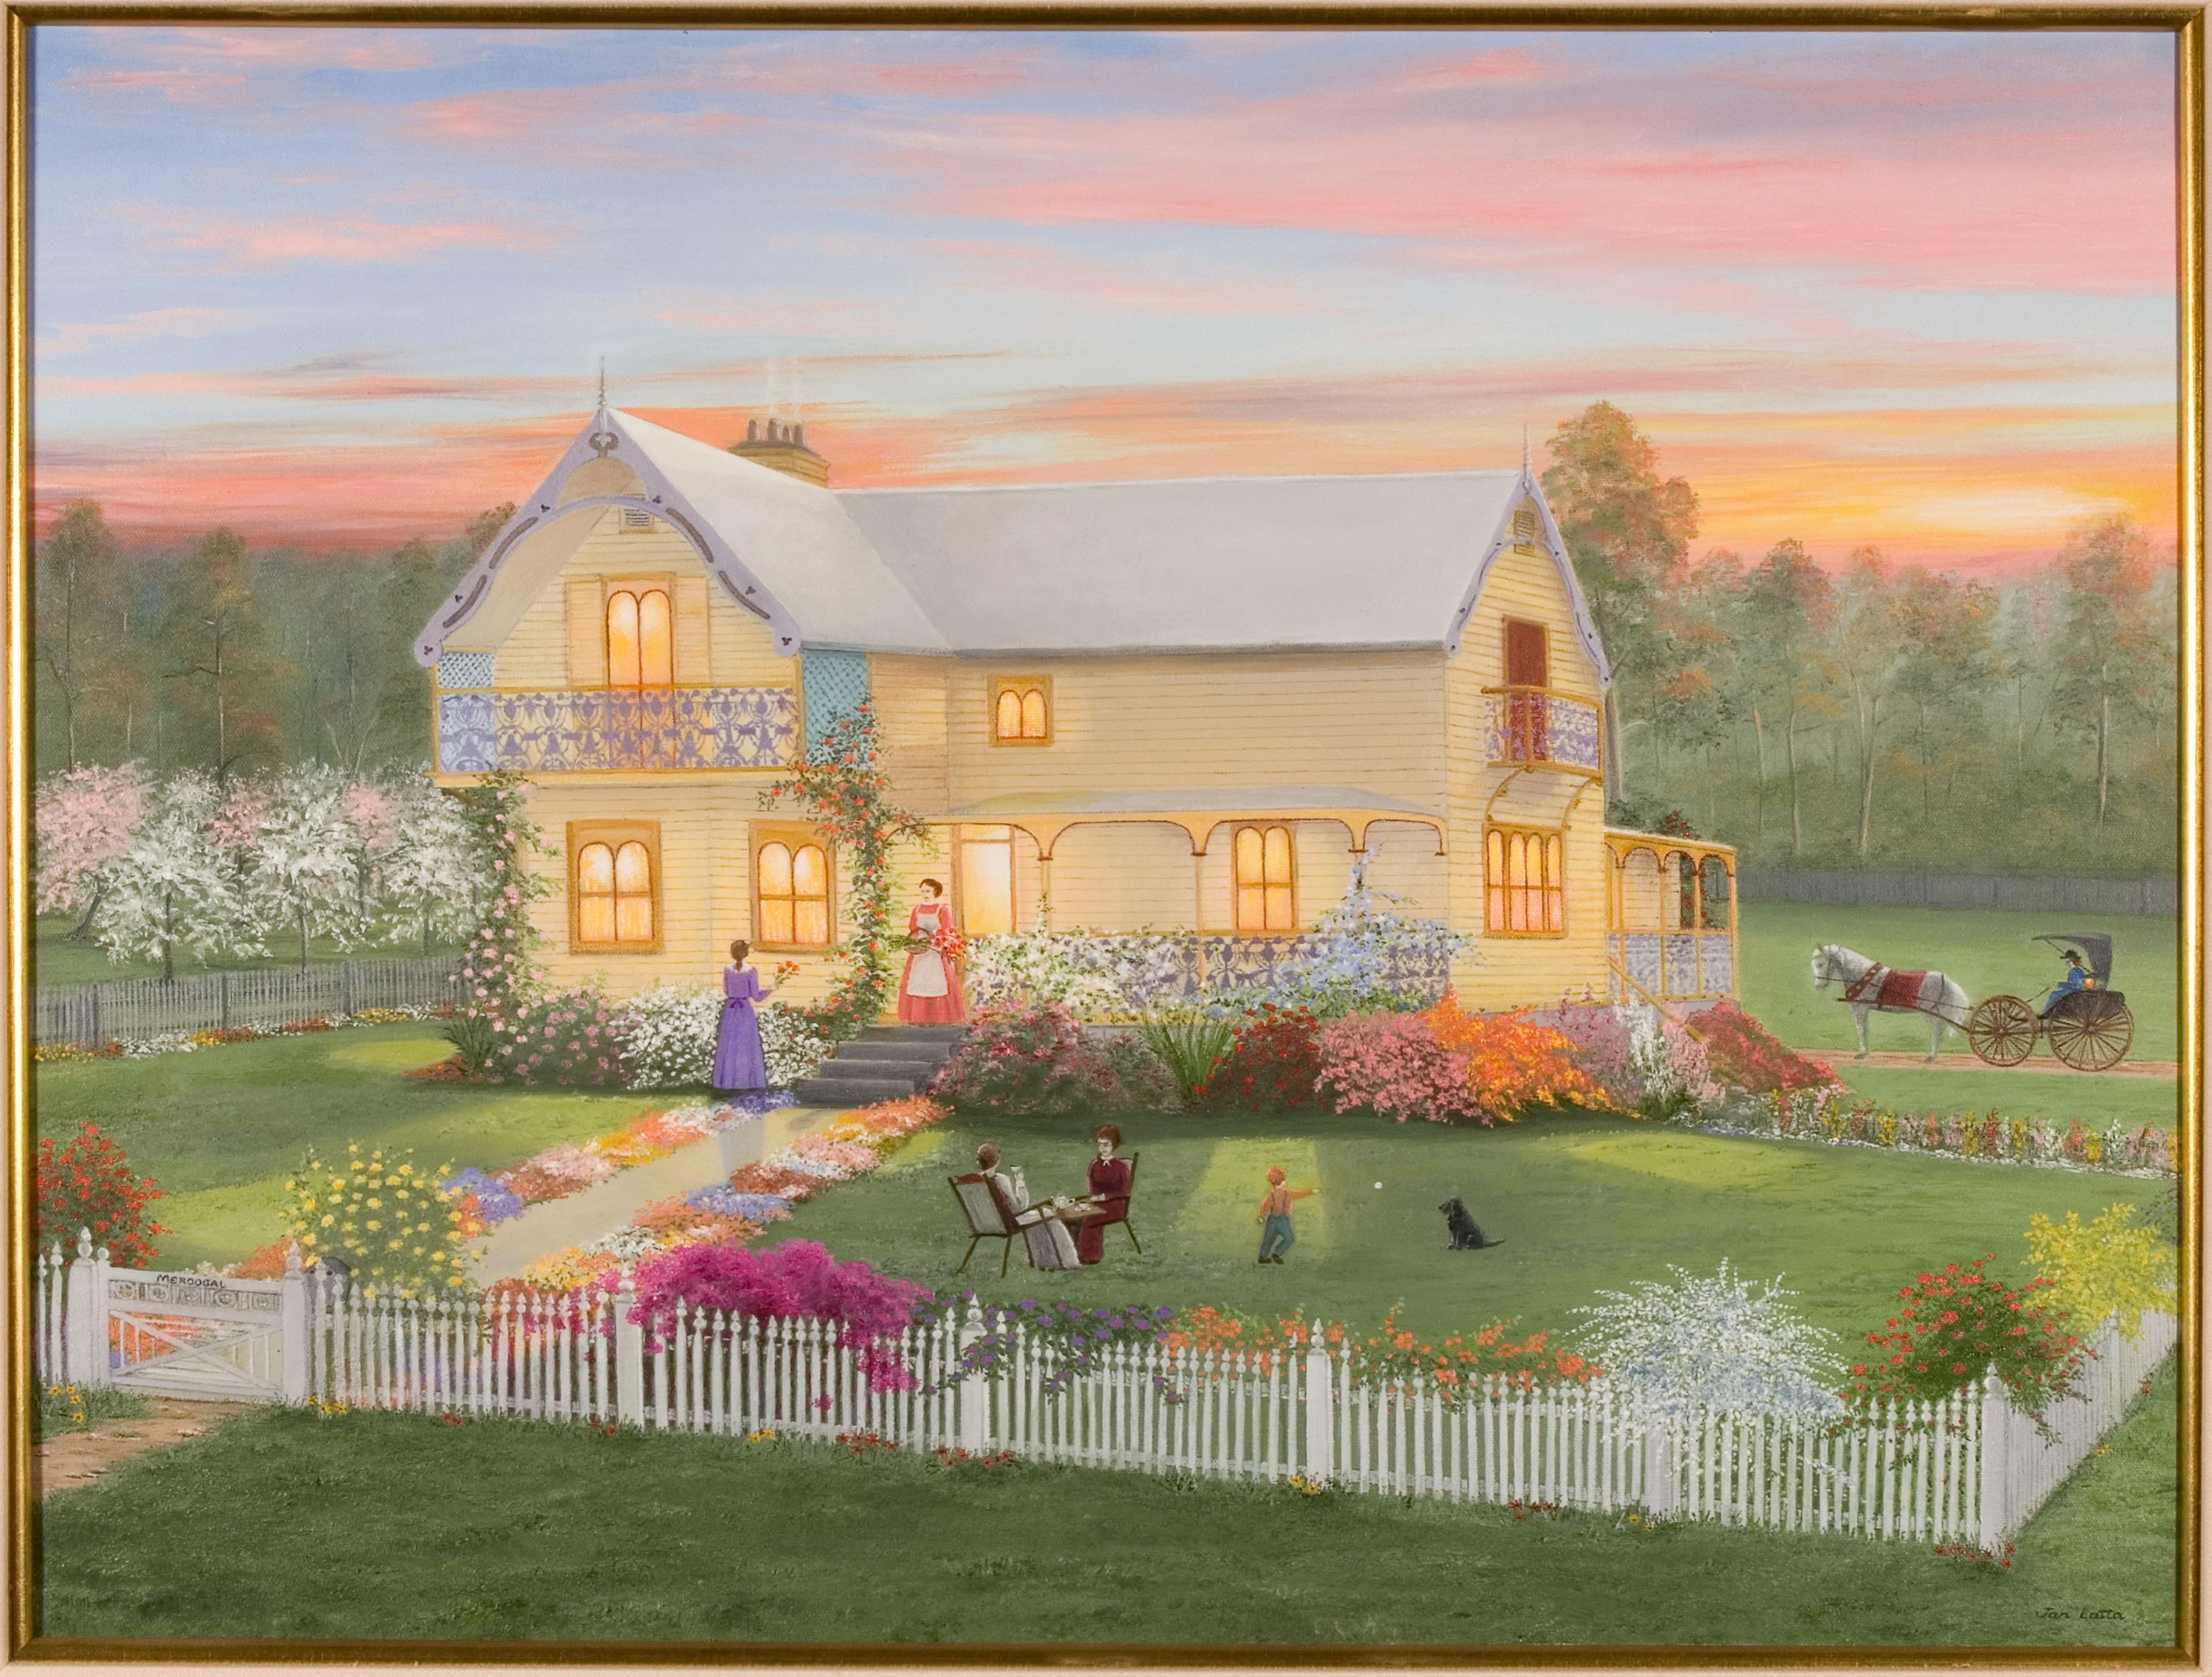 A painting of a house and family